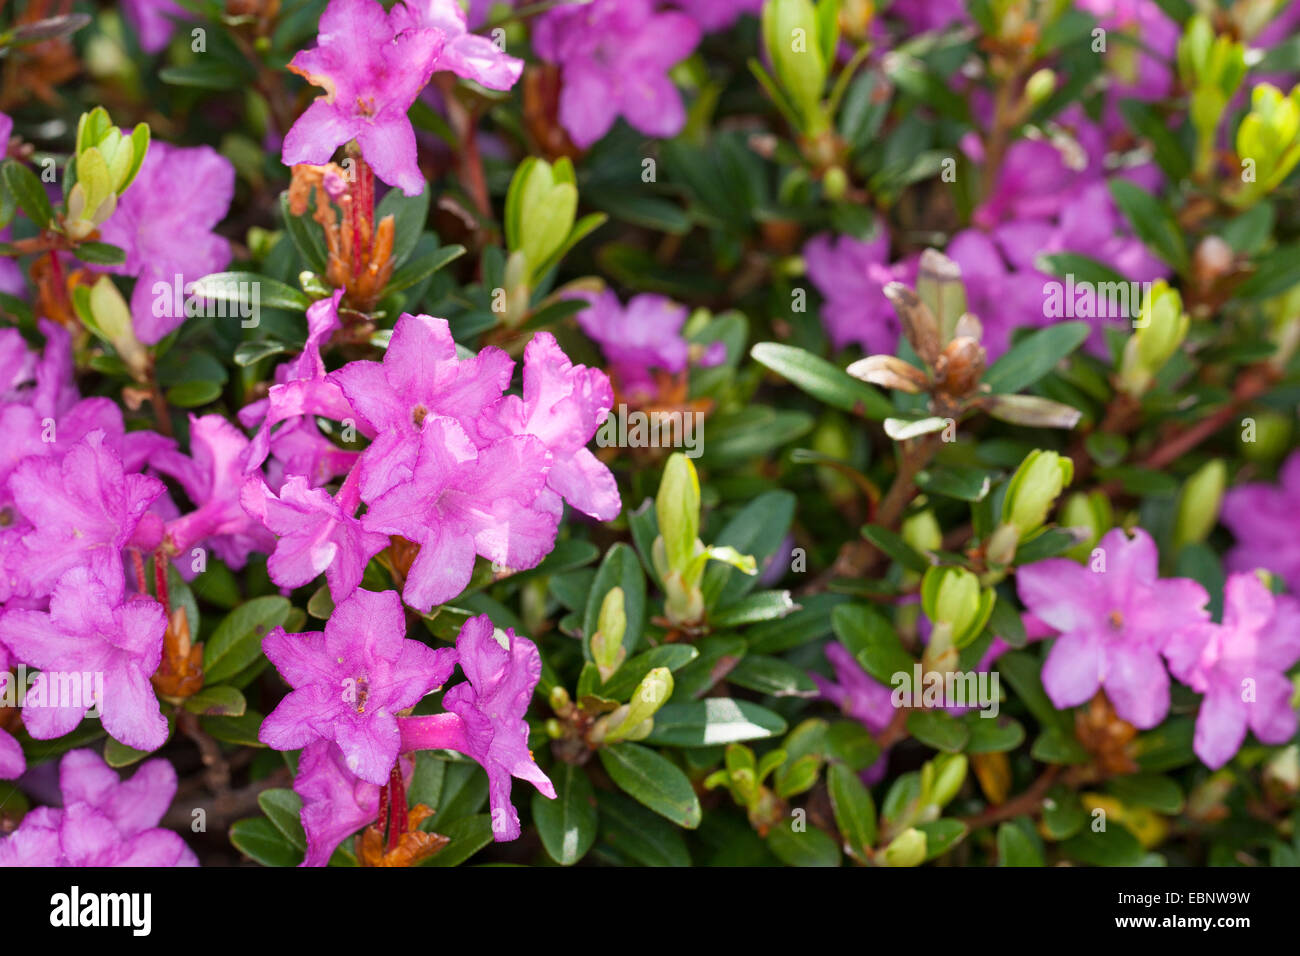 Myrtle-leaf rhododendron (Rhododendron myrtifolium), blooming Stock Photo